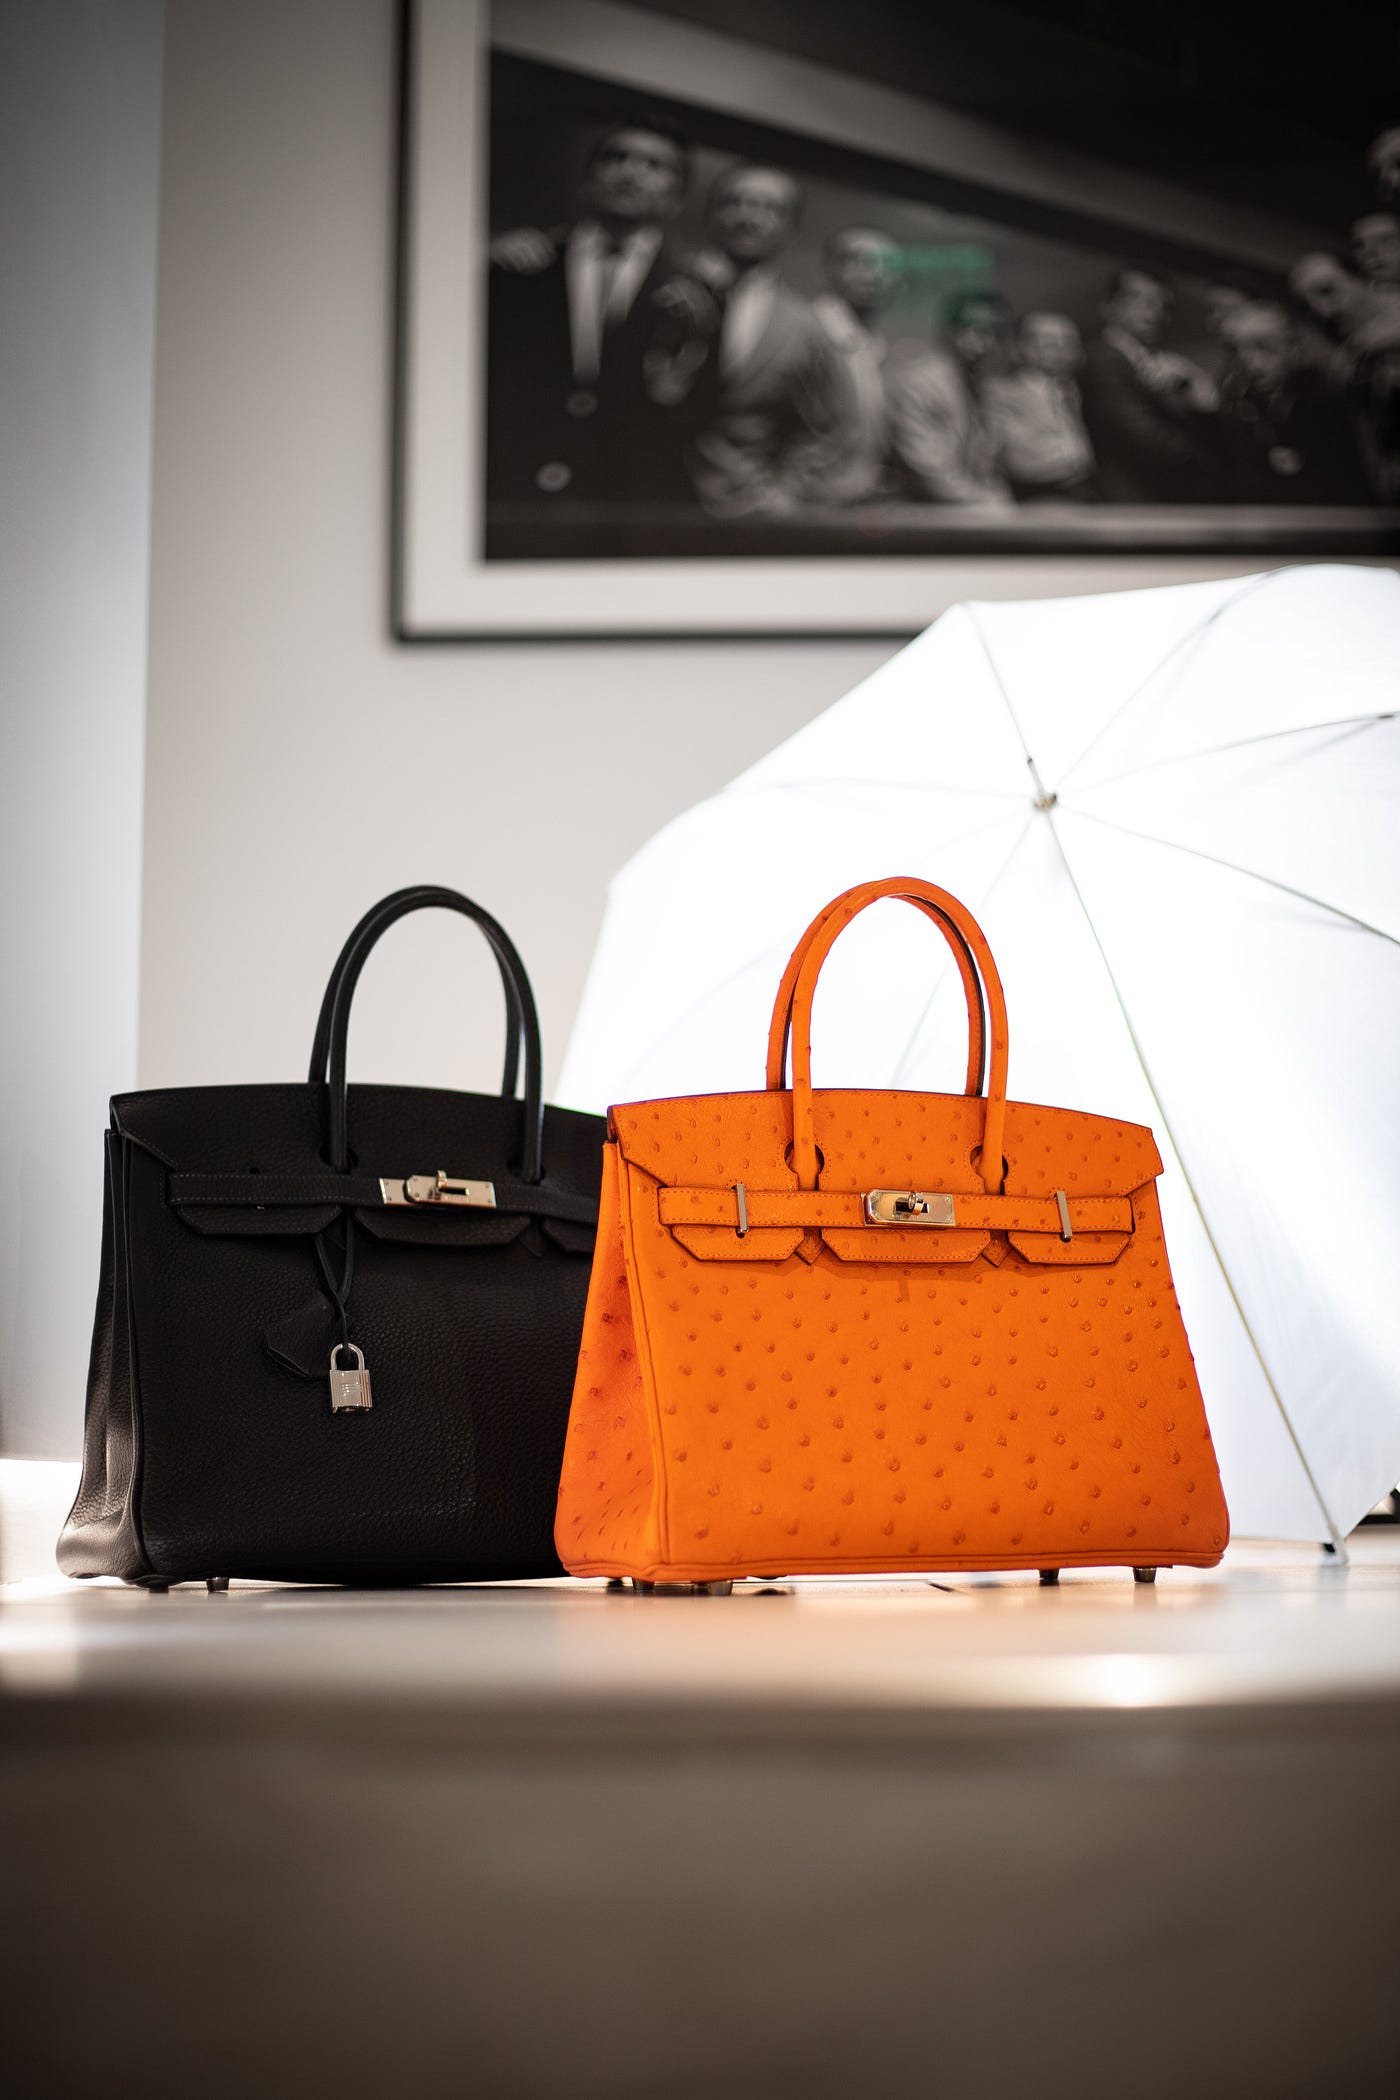 WHY ARE DESIGNER HANDBAGS SO EXPENSIVE?, by The Loan Companies